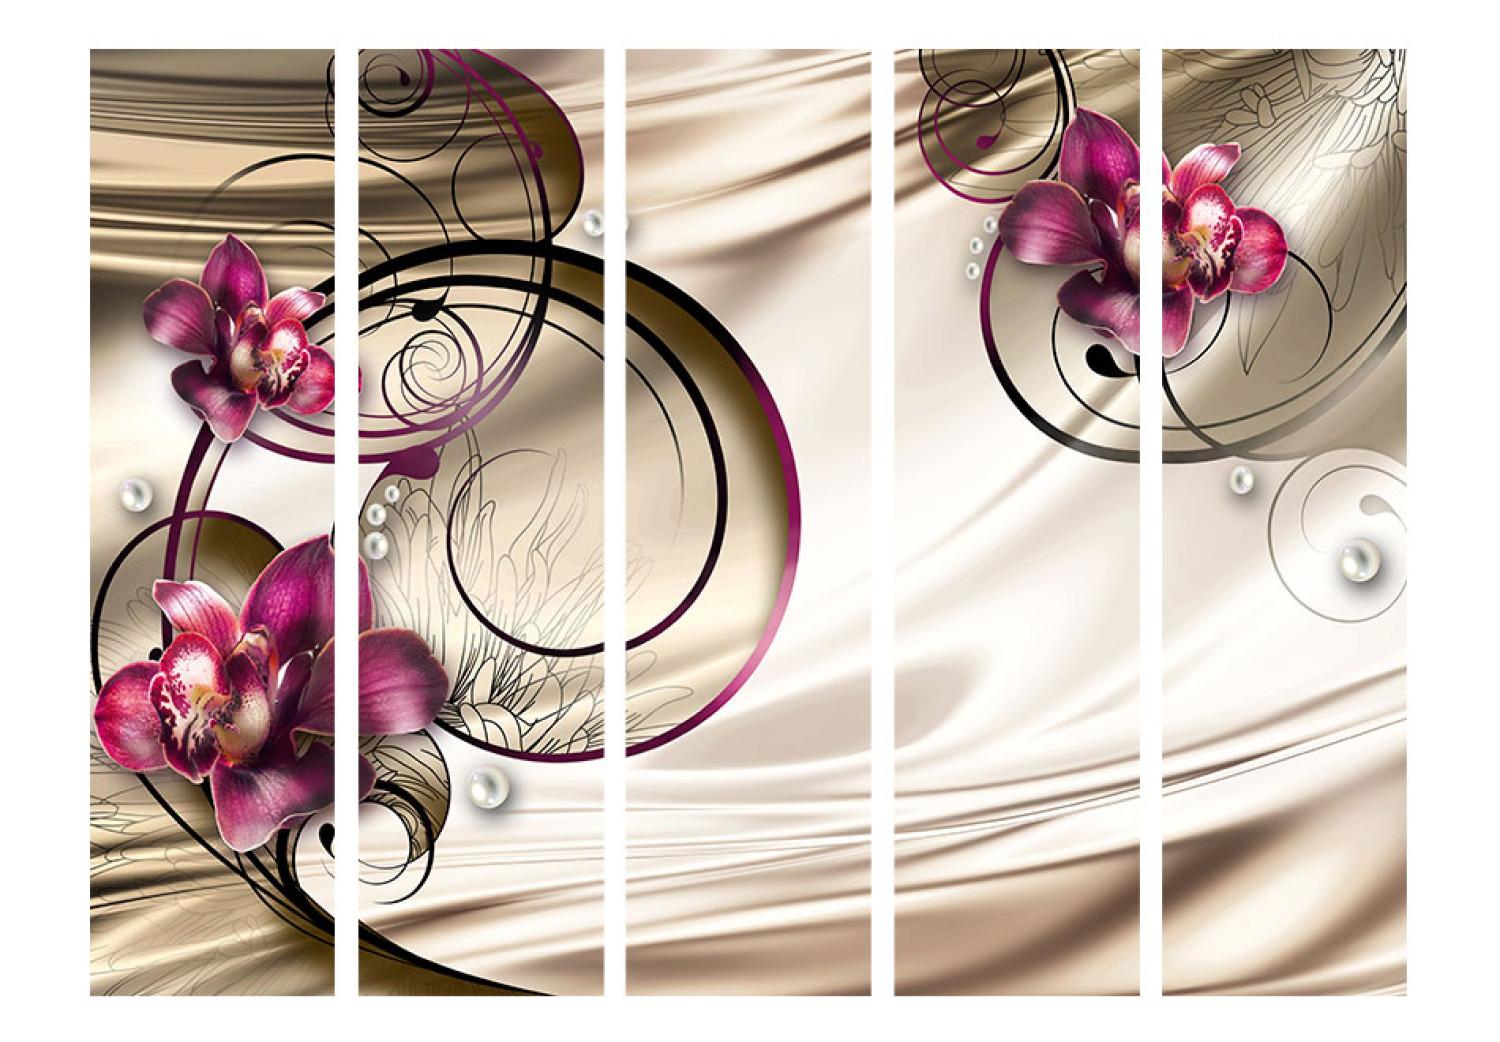 Room Divider Sweet Sensations II - orchid flowers against abstract ornaments